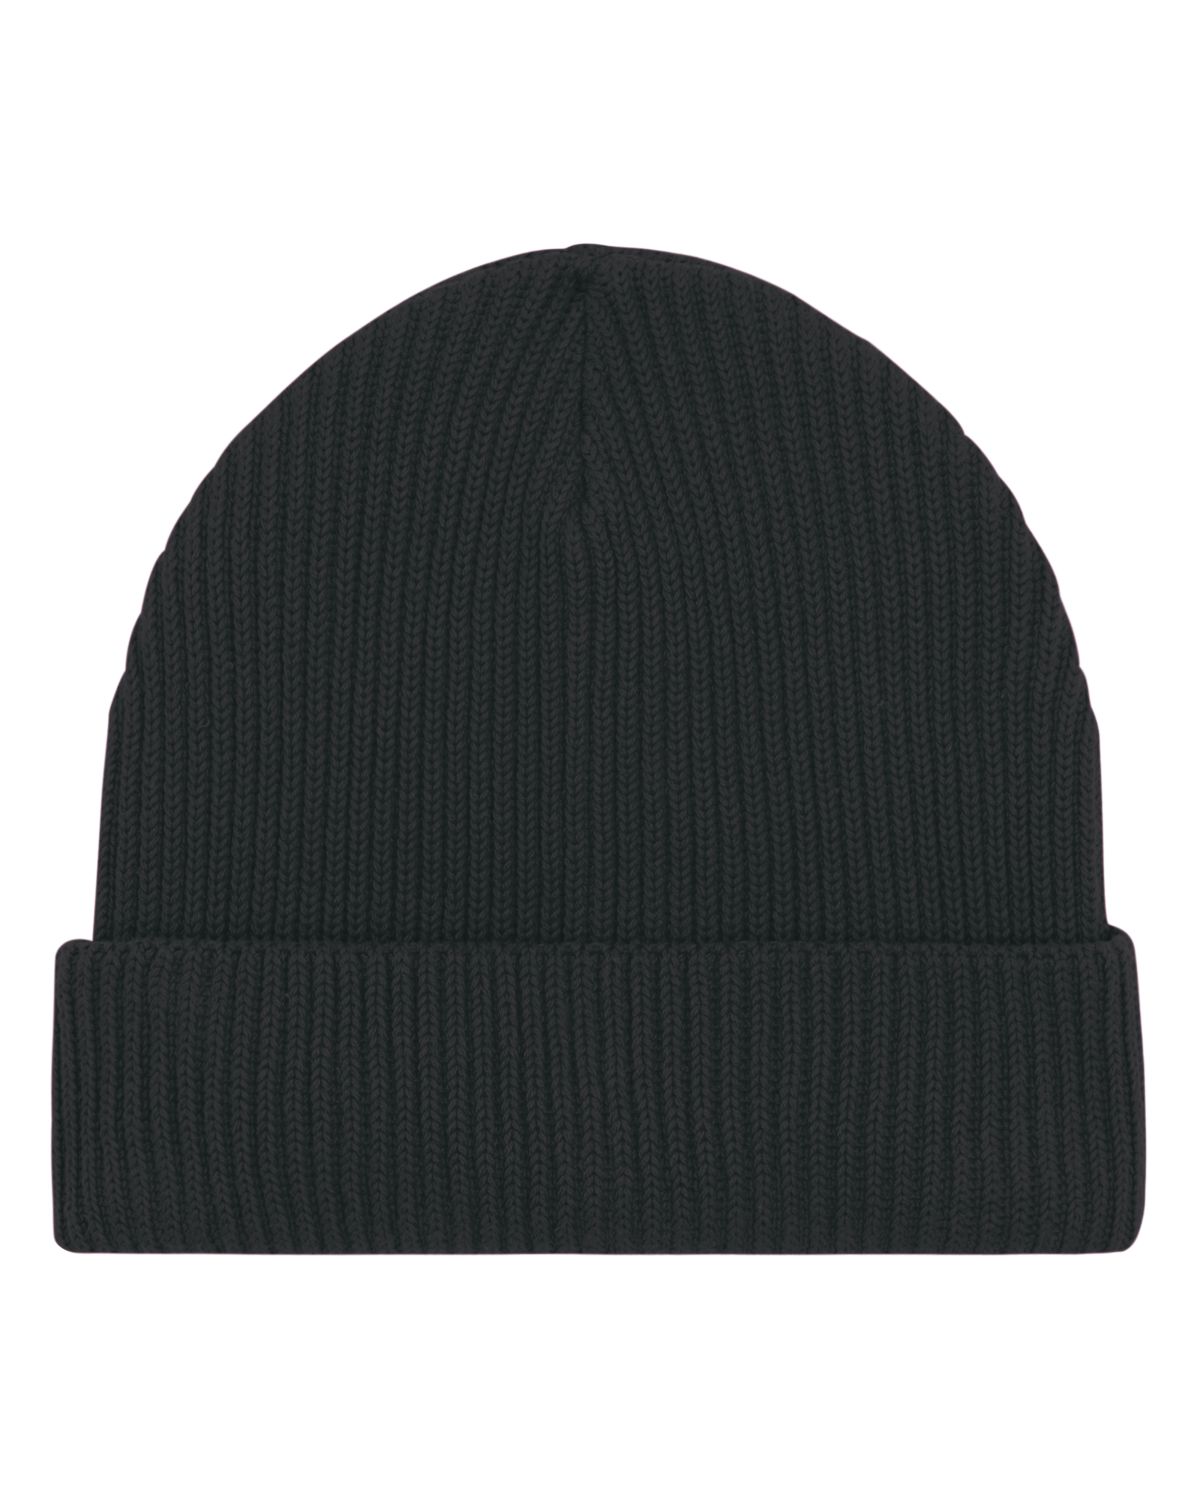 customize your own beanie Hat